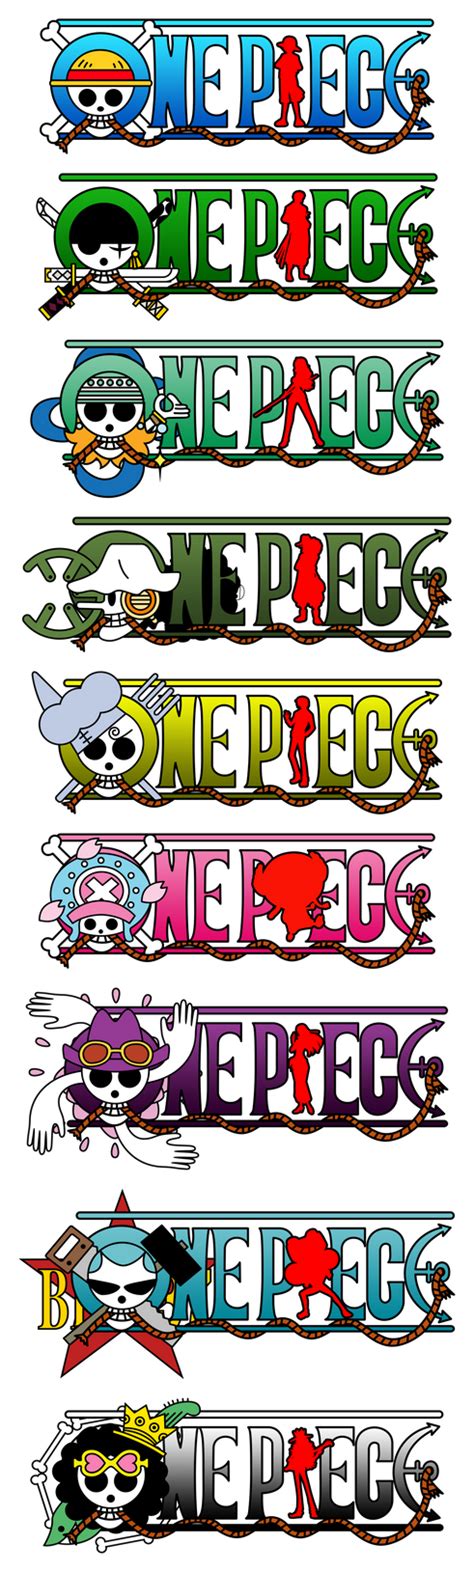 One Piece Logo Straw Hats Crew Y Post Timeskip By Mcmgcls On